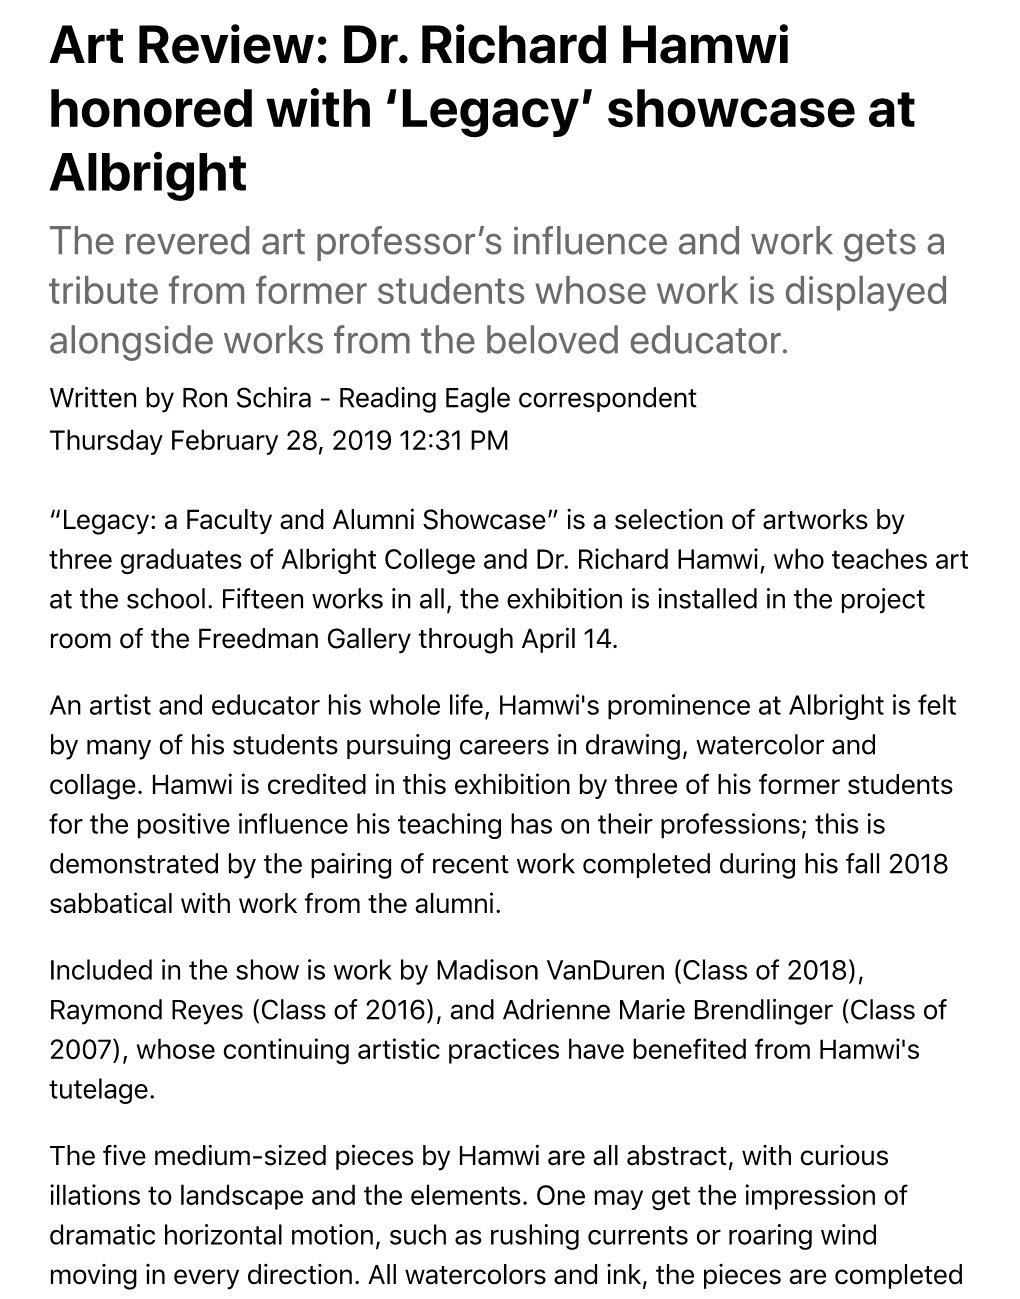 Art Review: Dr. Richard Hamwi Honored with 'Legacyʼ Showcase at Albright